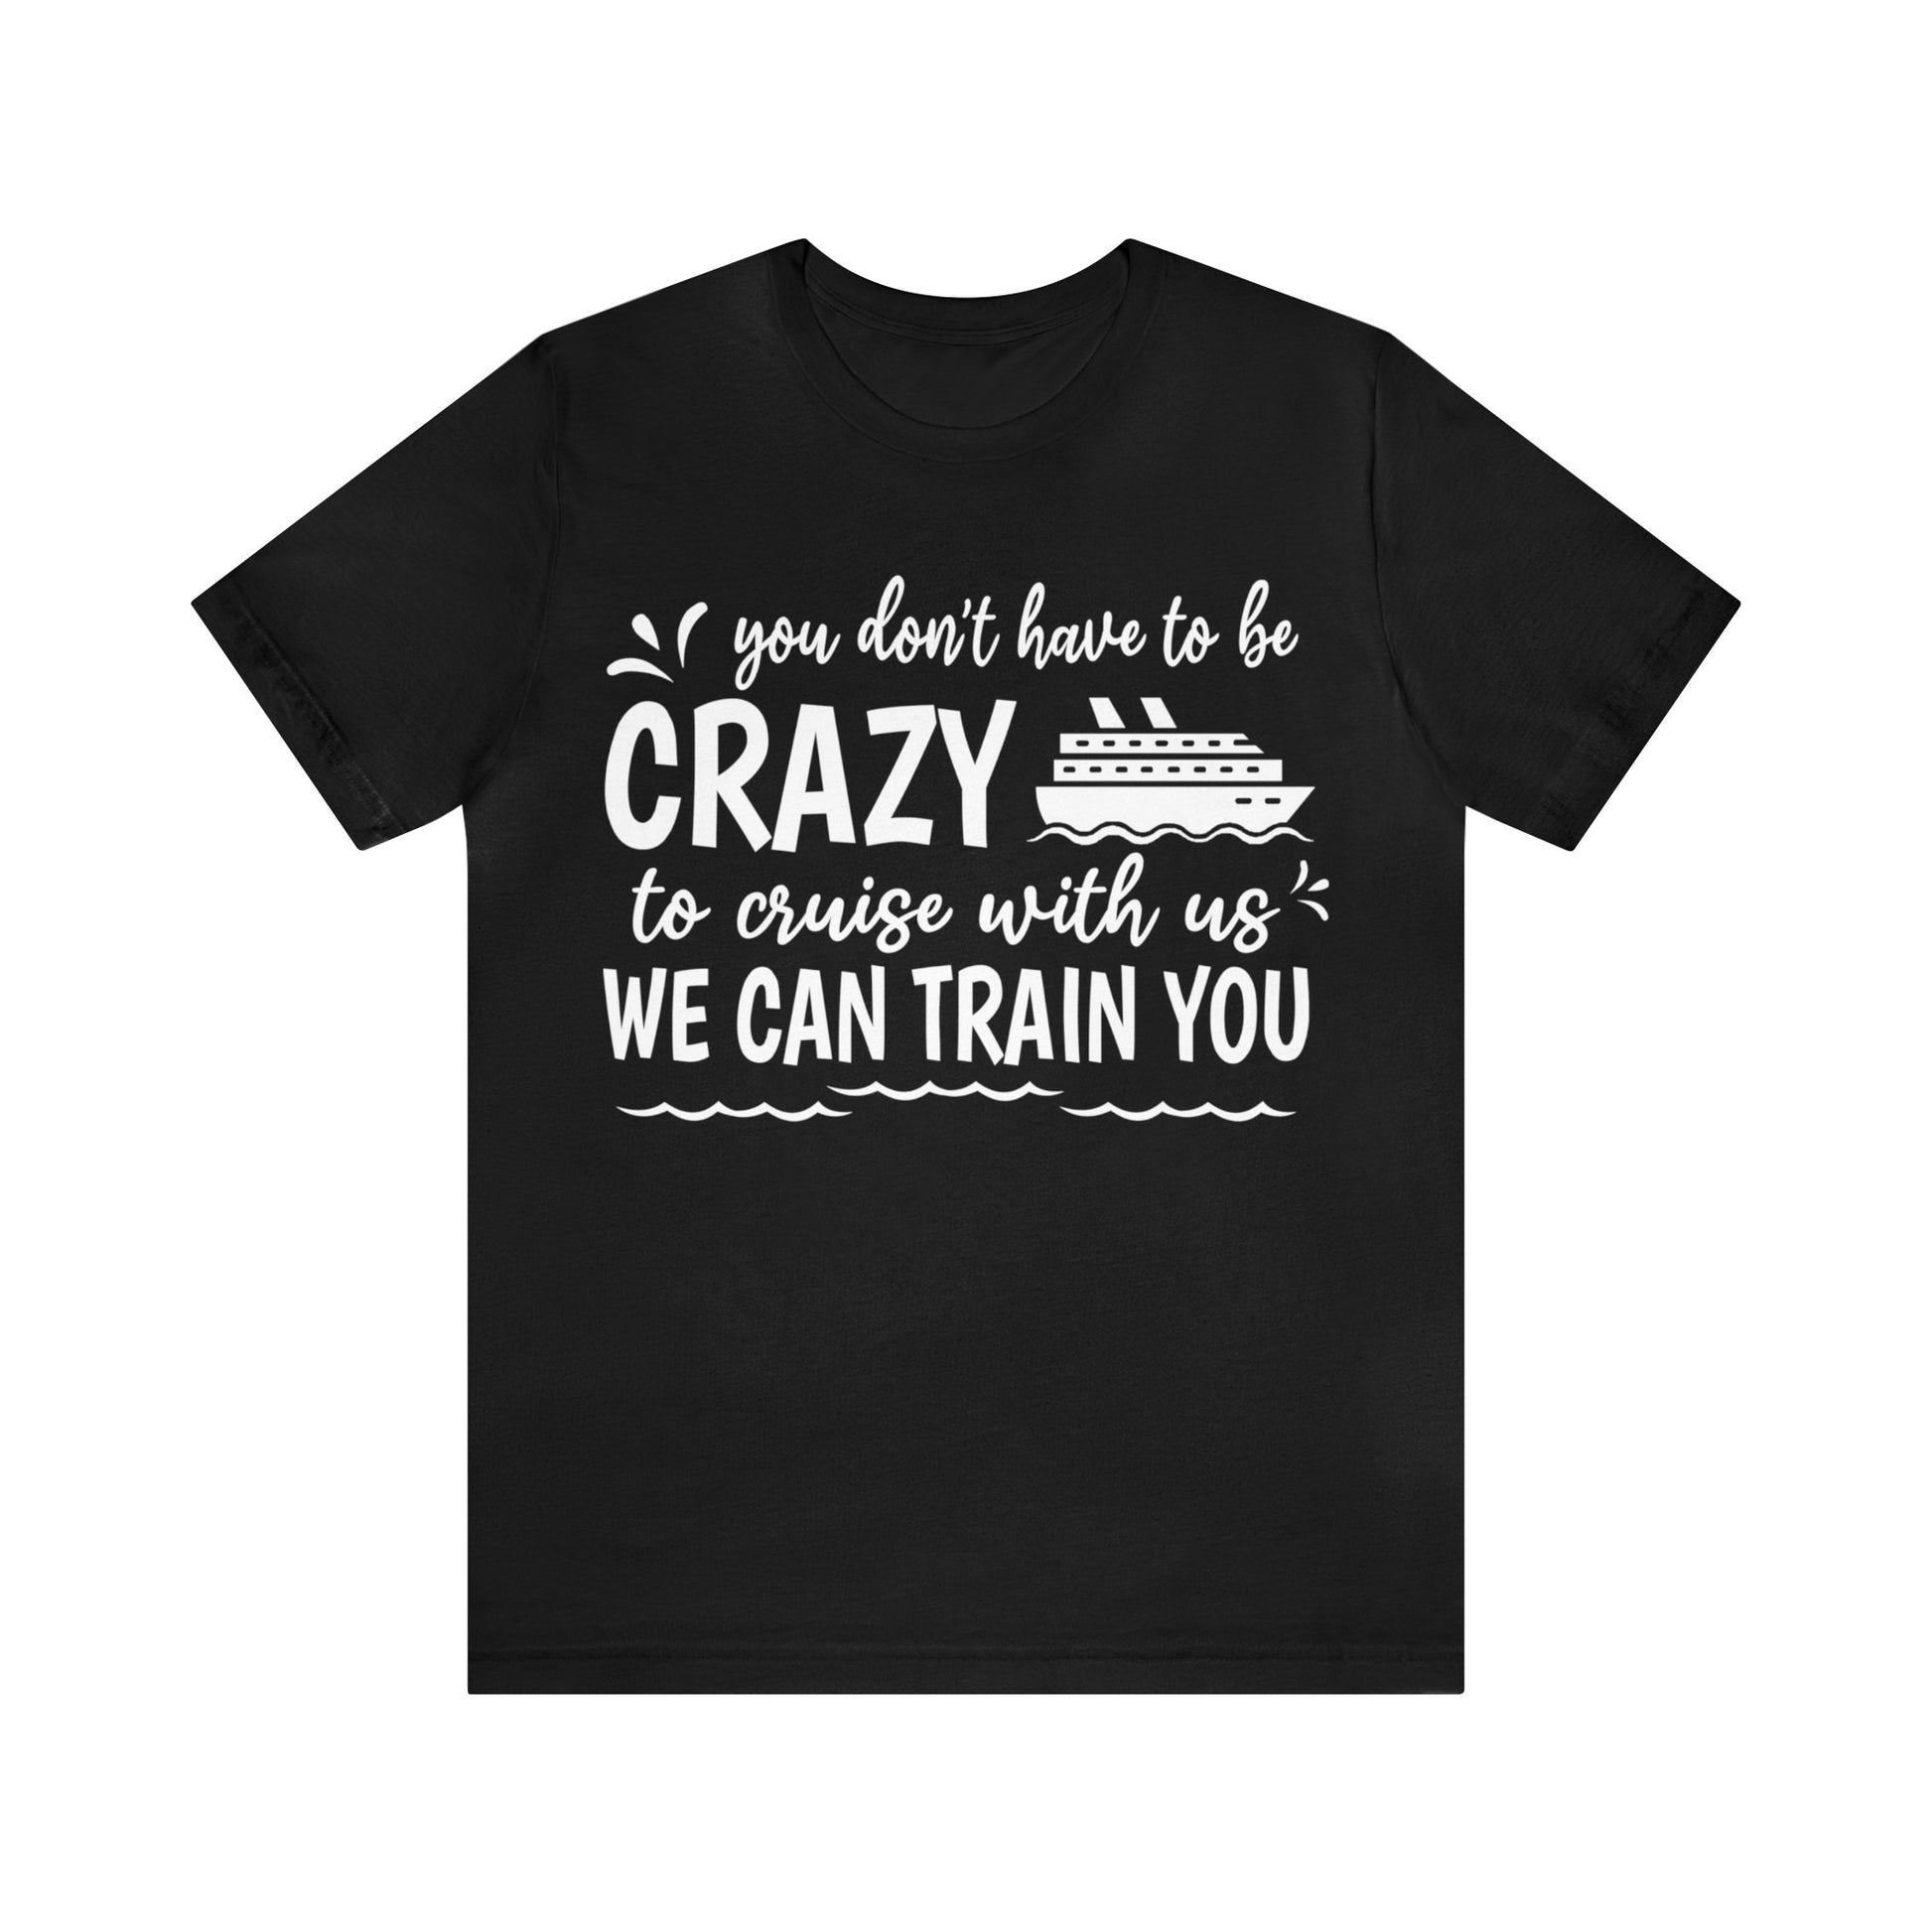 You don't have to be CRAZY to cruise with us We can train you Shirt in Black